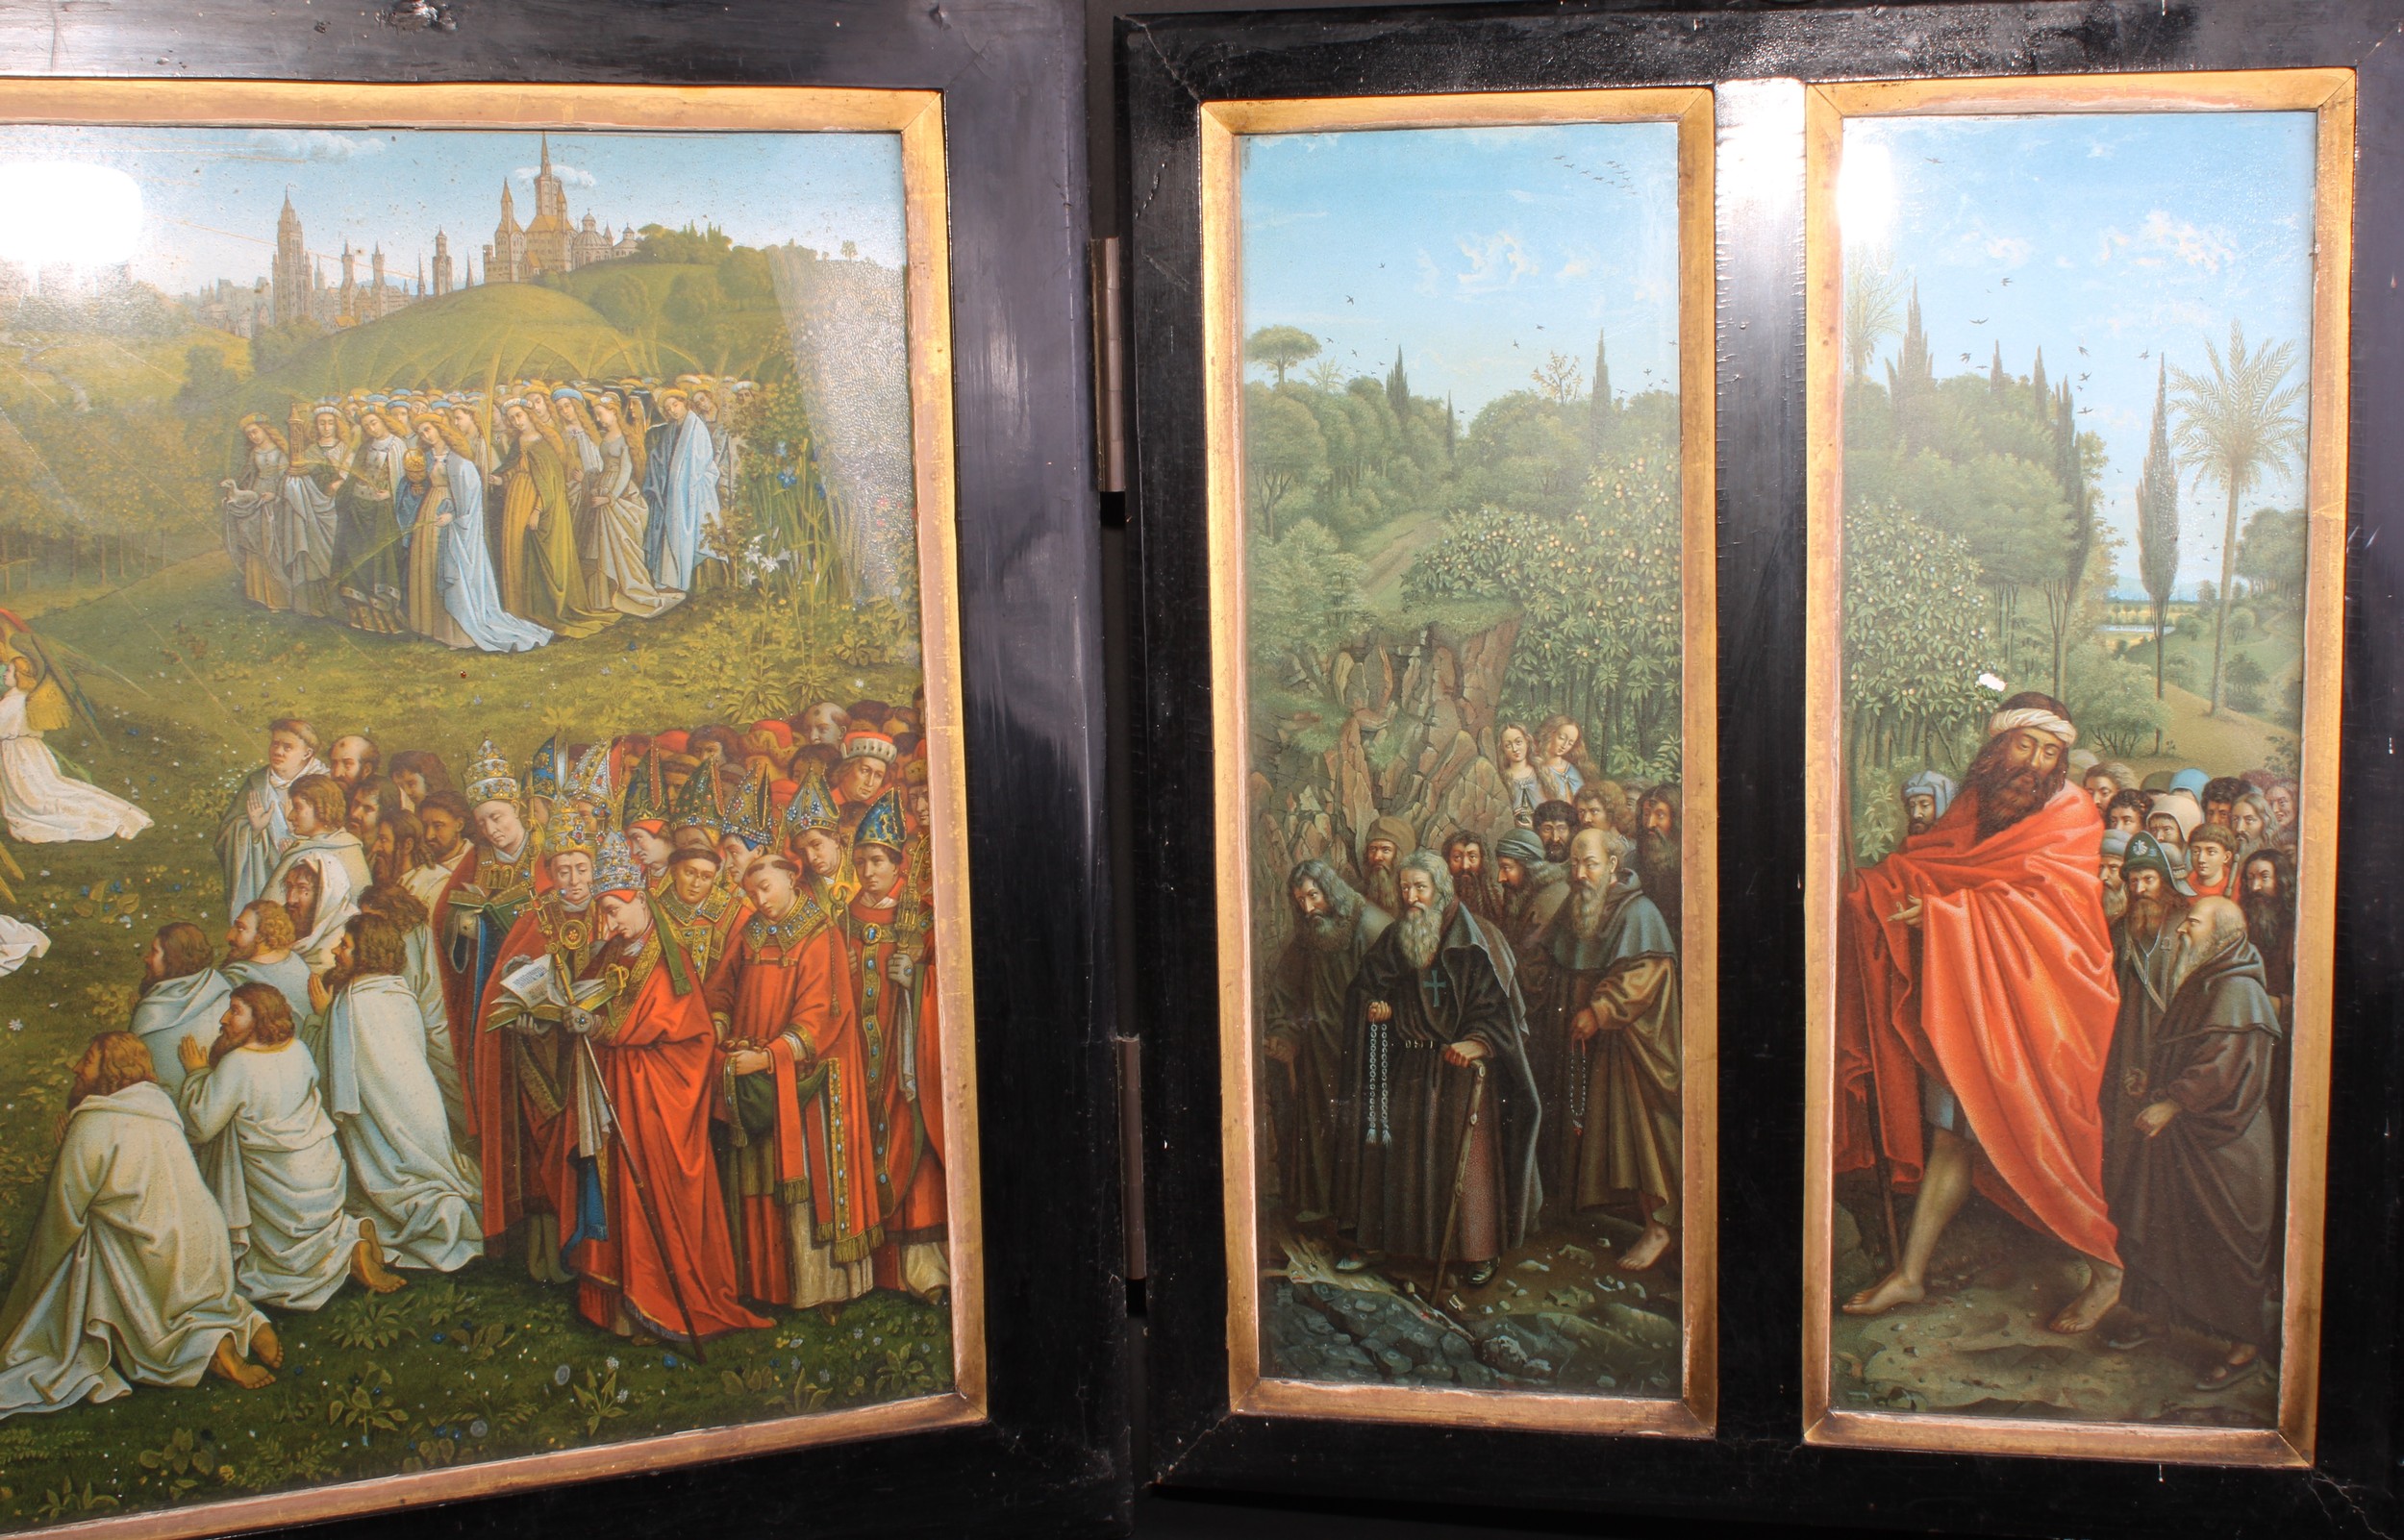 A late 19th/early 20th century antiquarian's facsimile triptych, after the Ghent altarpiece, the - Image 3 of 4